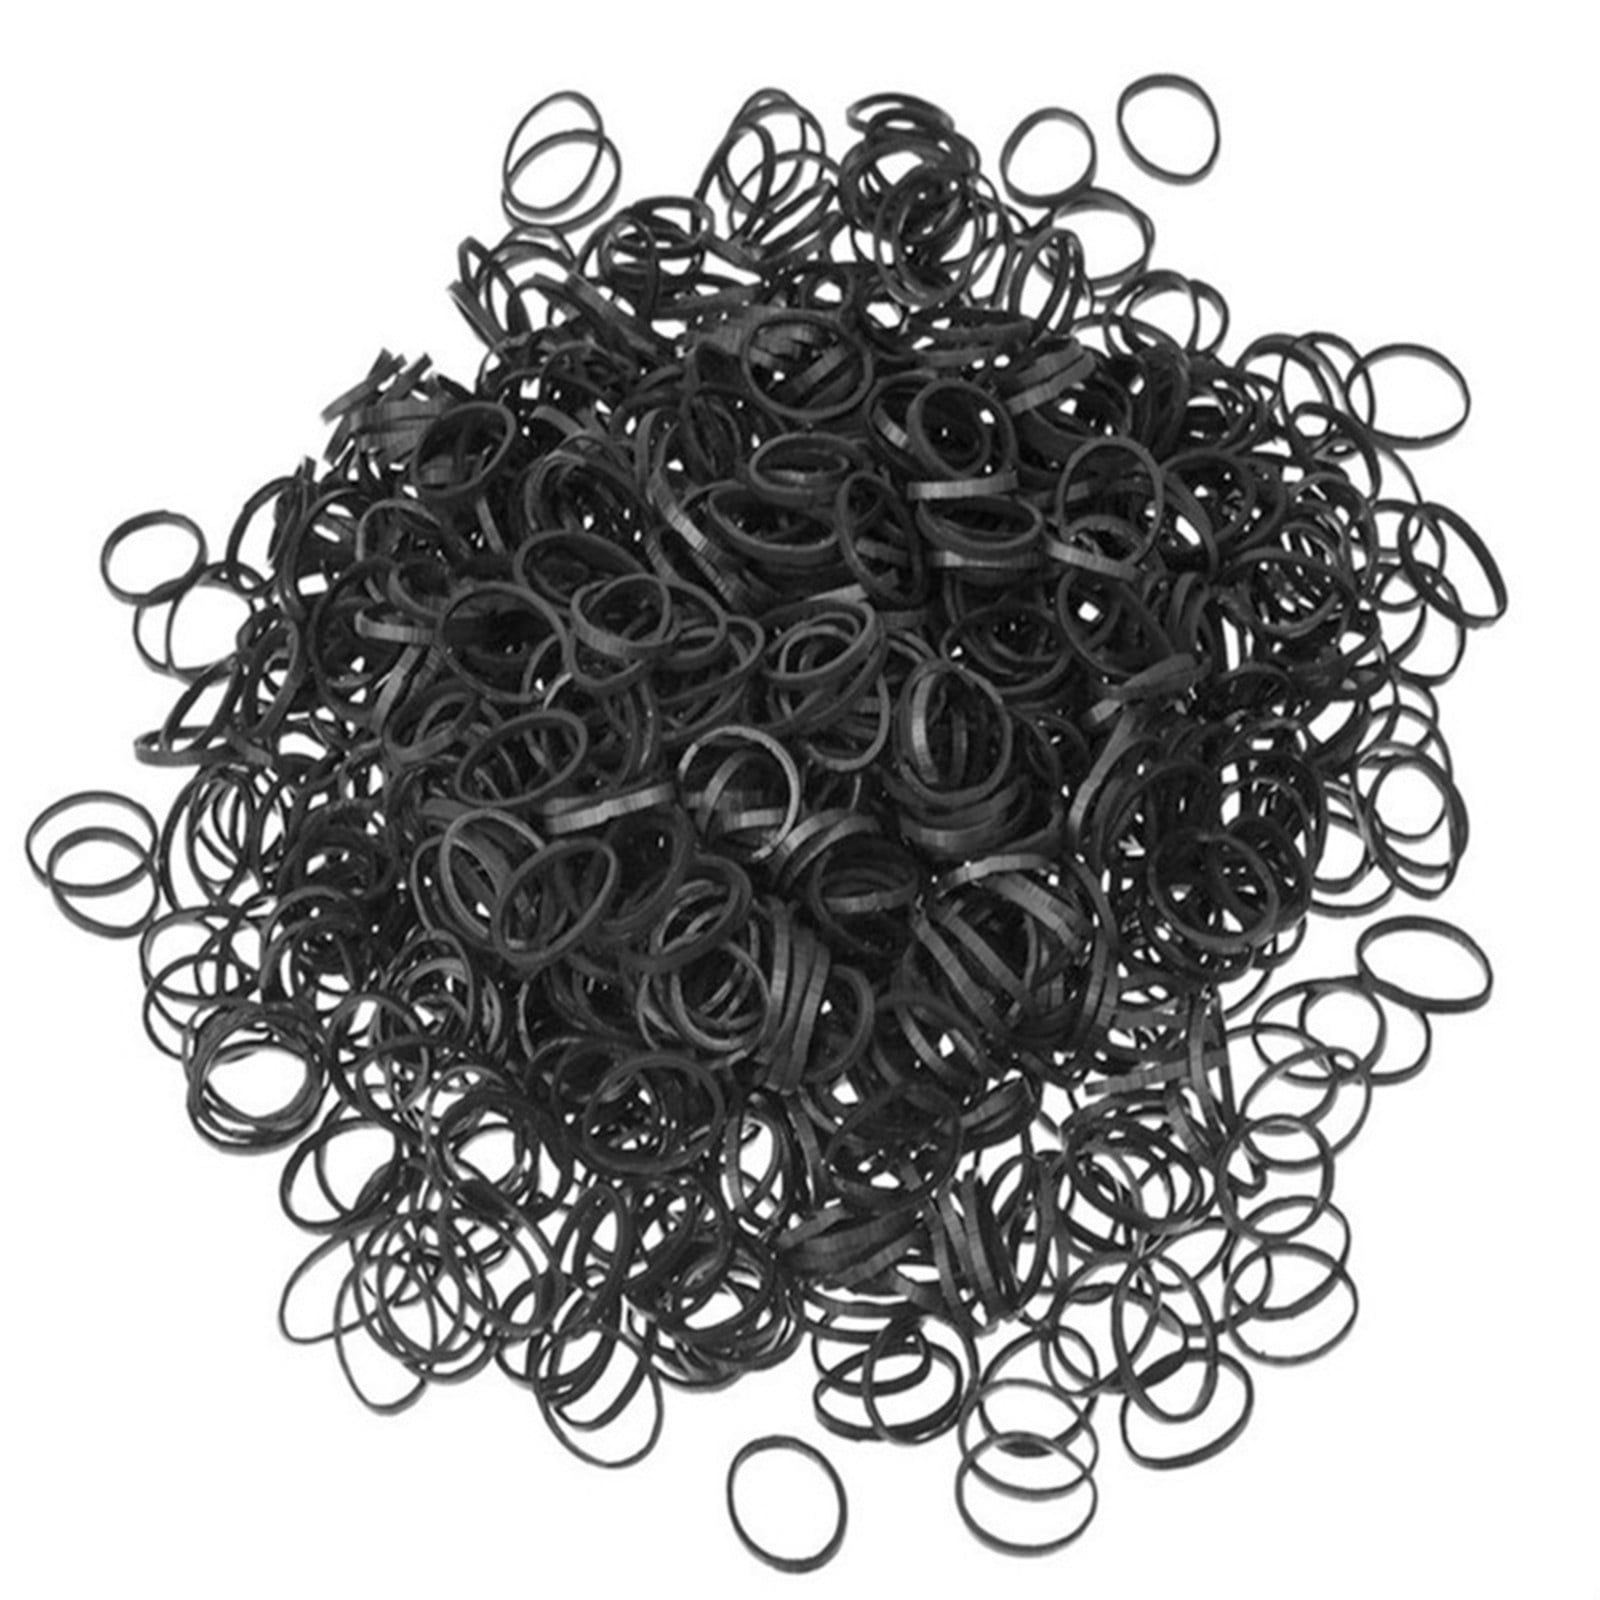 Pack of 500 Small Black Rubber Bands Rubberbands for Hair Styling, Kids  Hair, Braids Hair, Dreadlocks, Babies,Toddlers, Hair Twists, Ethnic Styles  and Even Fishing Tackle and Crafts, Urban Essence Brand